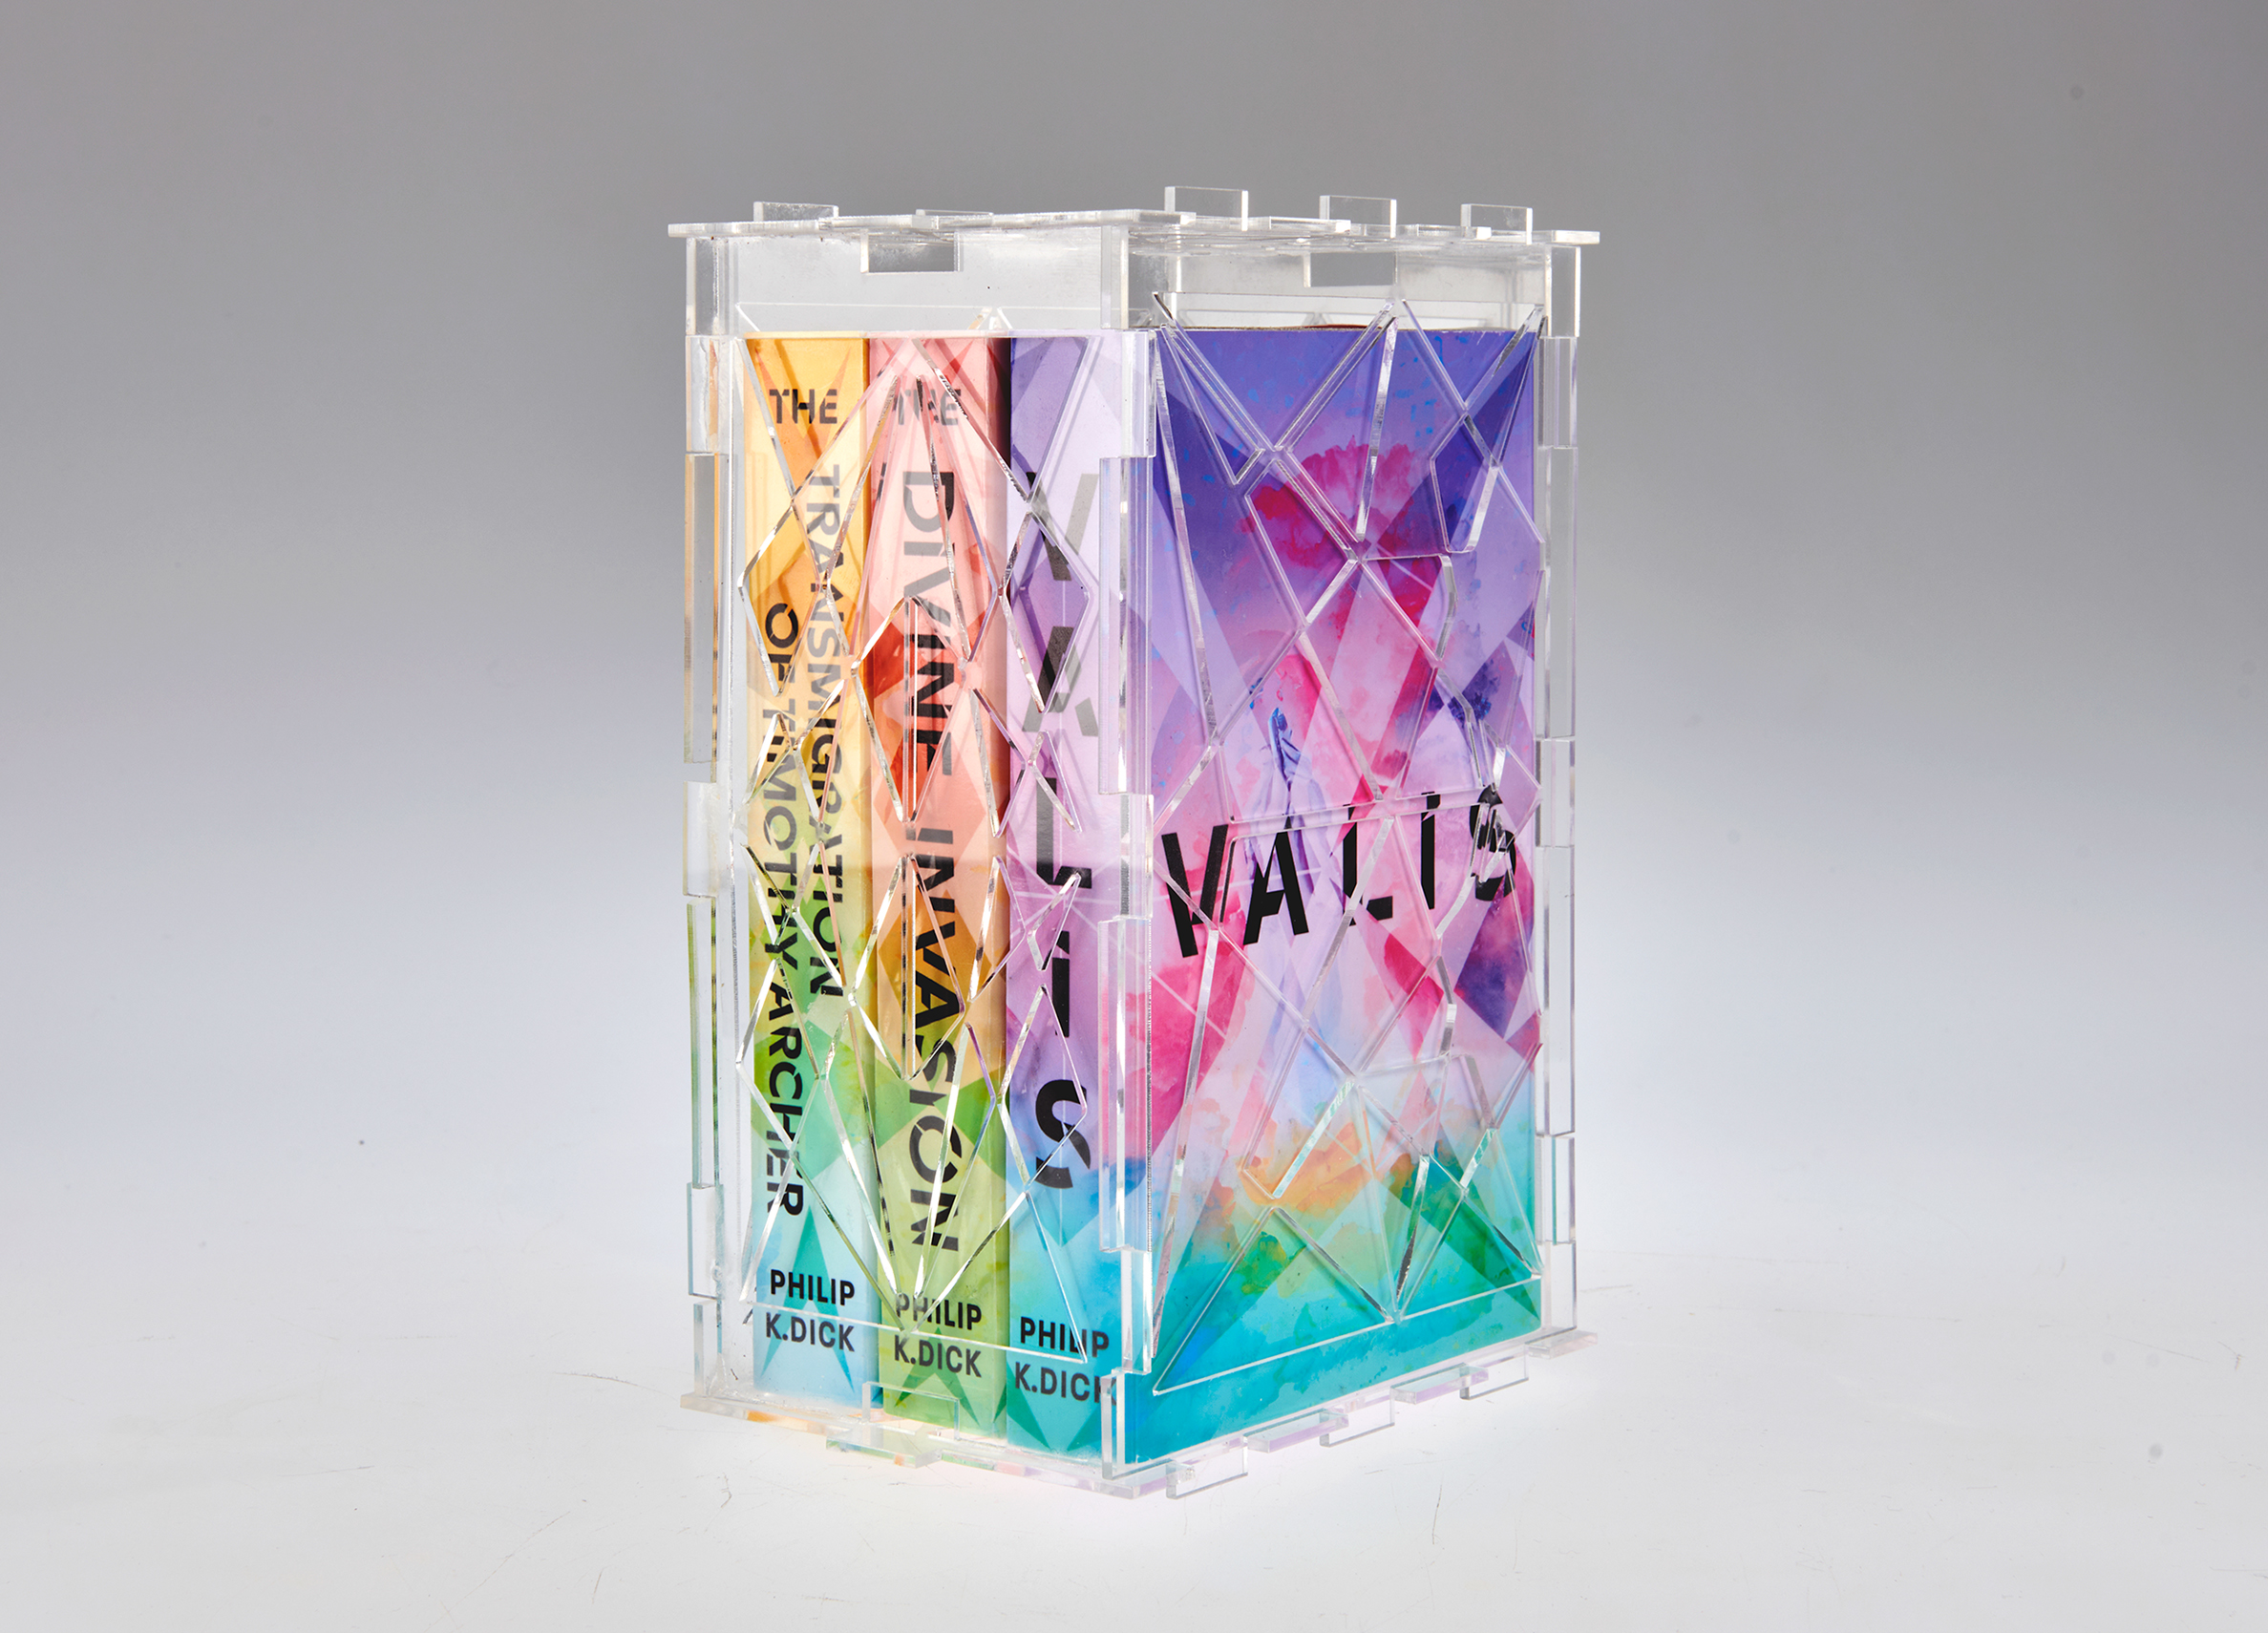 Book box set for Philip K Dicks Valis trilogy designed by Jake Cook. Featuring colourful connecting covers and a transparent collectors case.